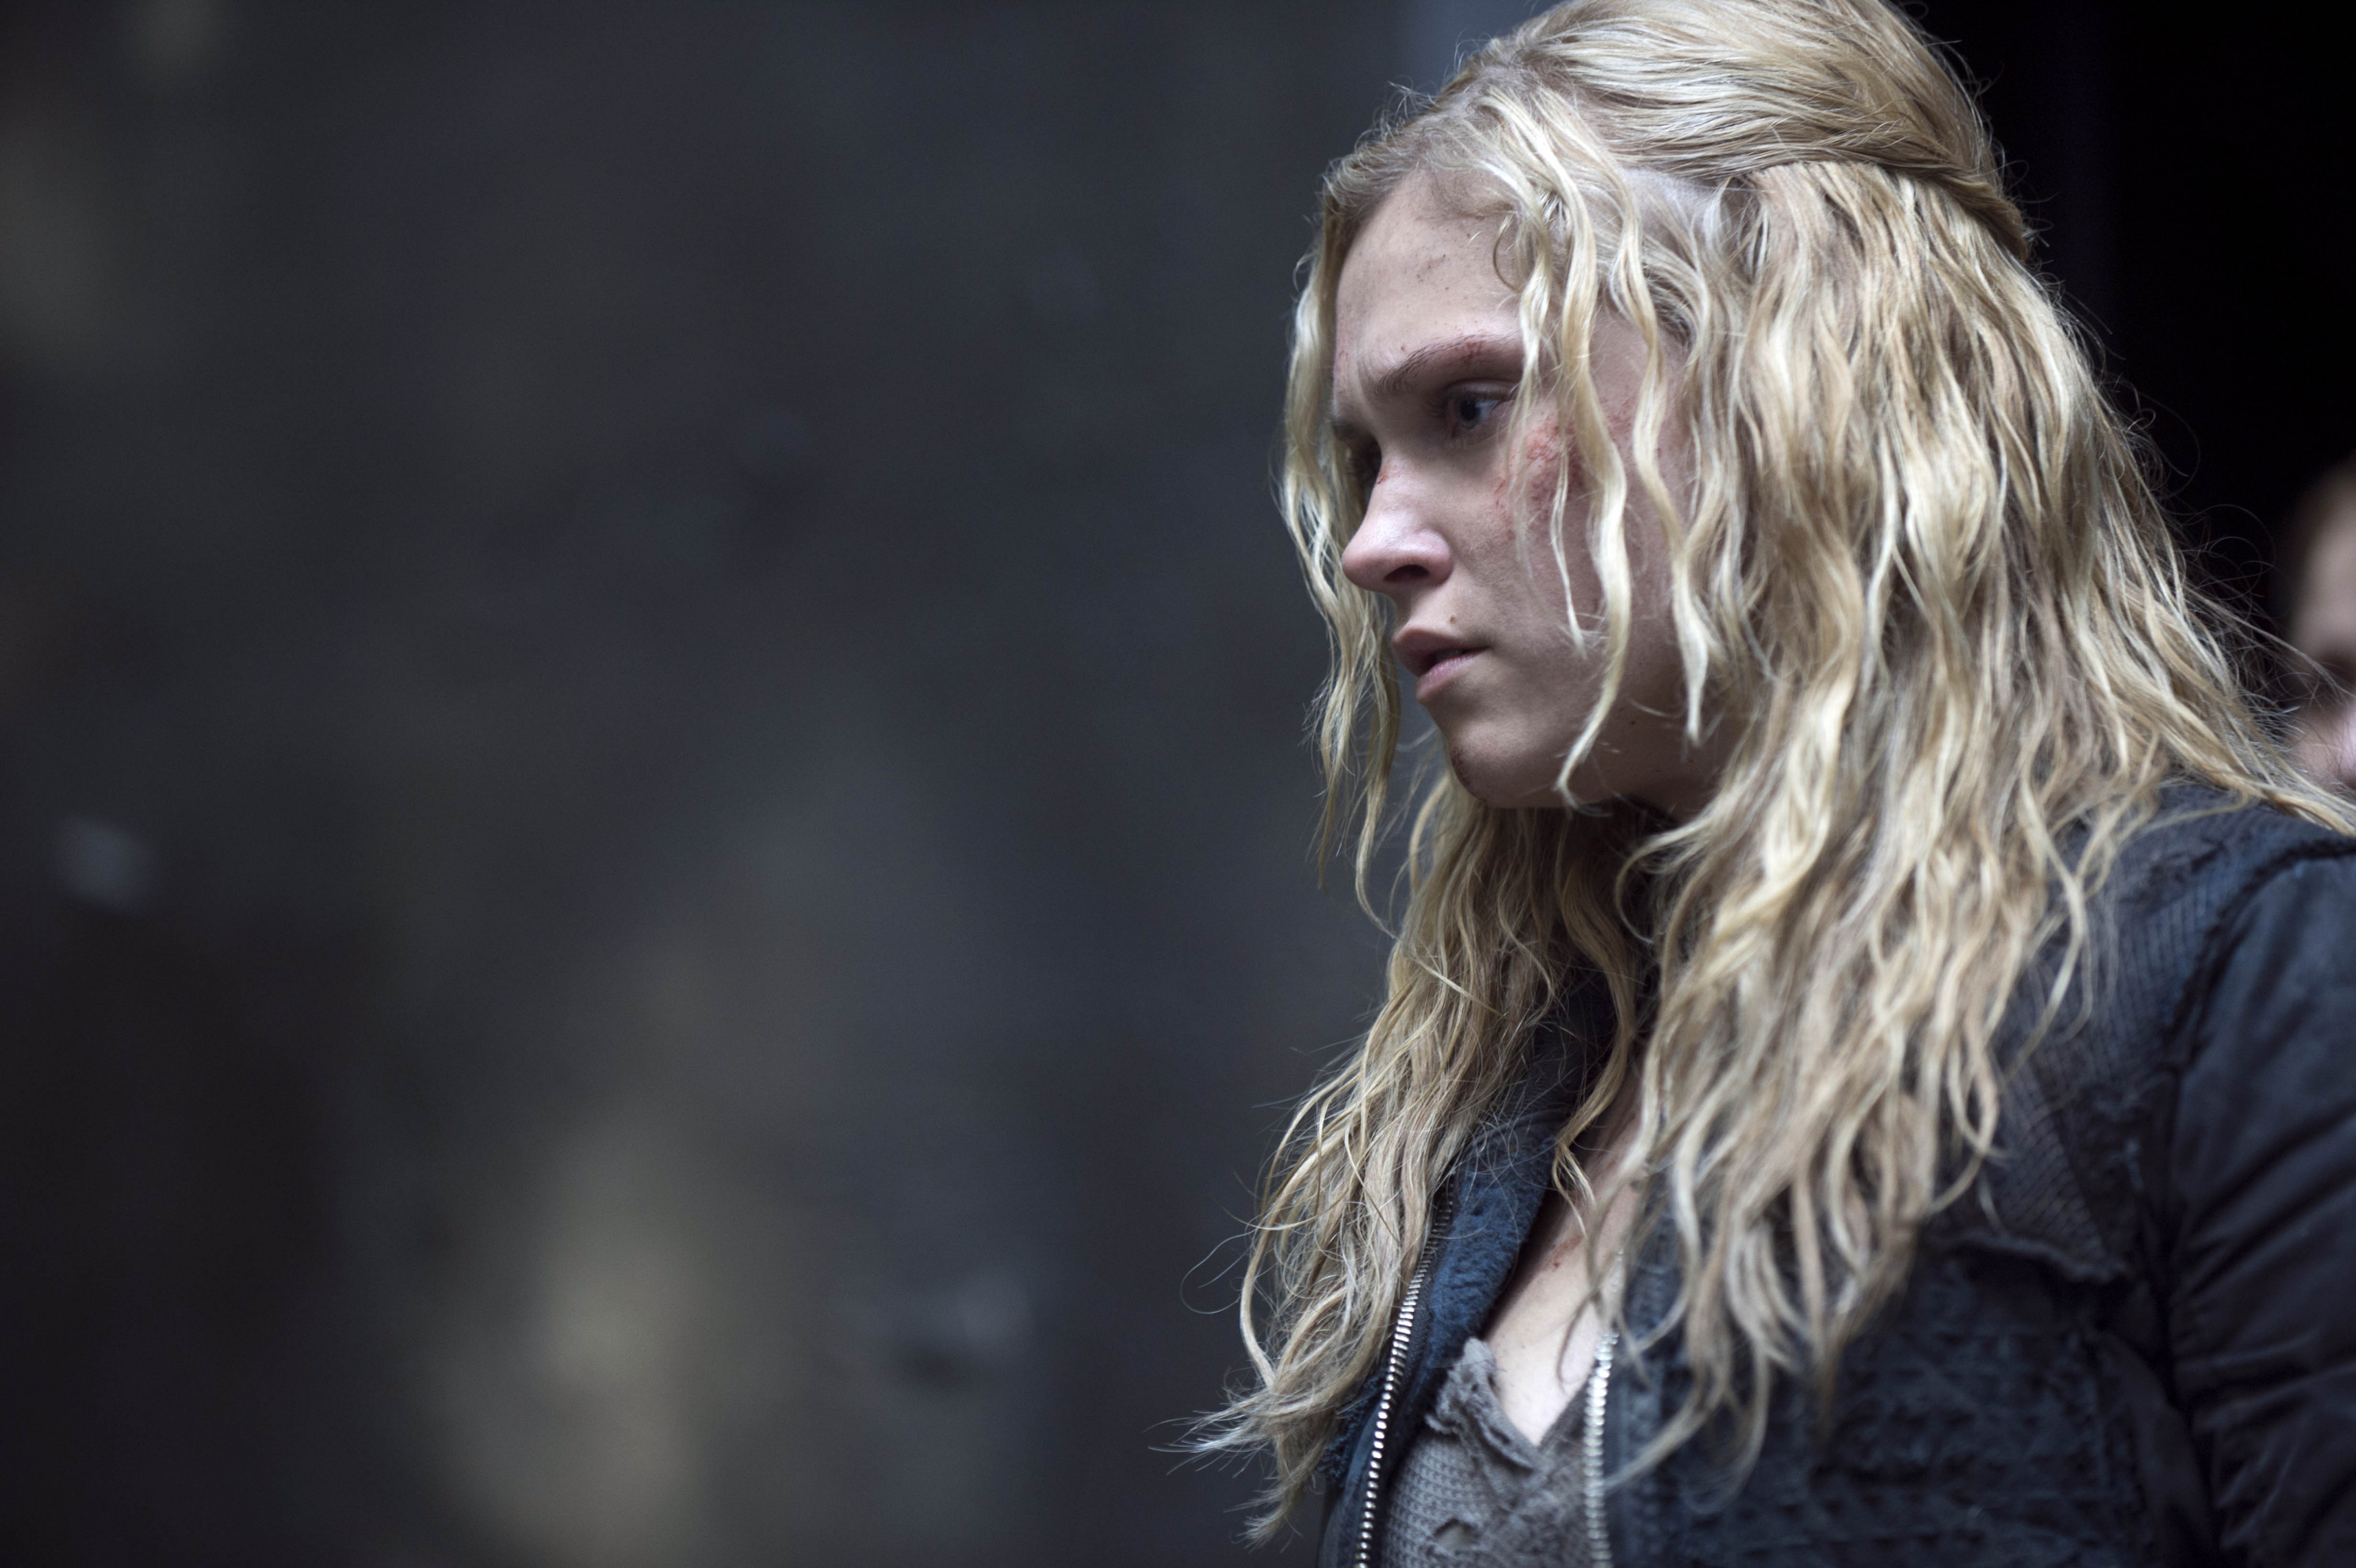 Related Clarke Griffin The 100 Wallpaper High Definition - Clarke Griffin - HD Wallpaper 